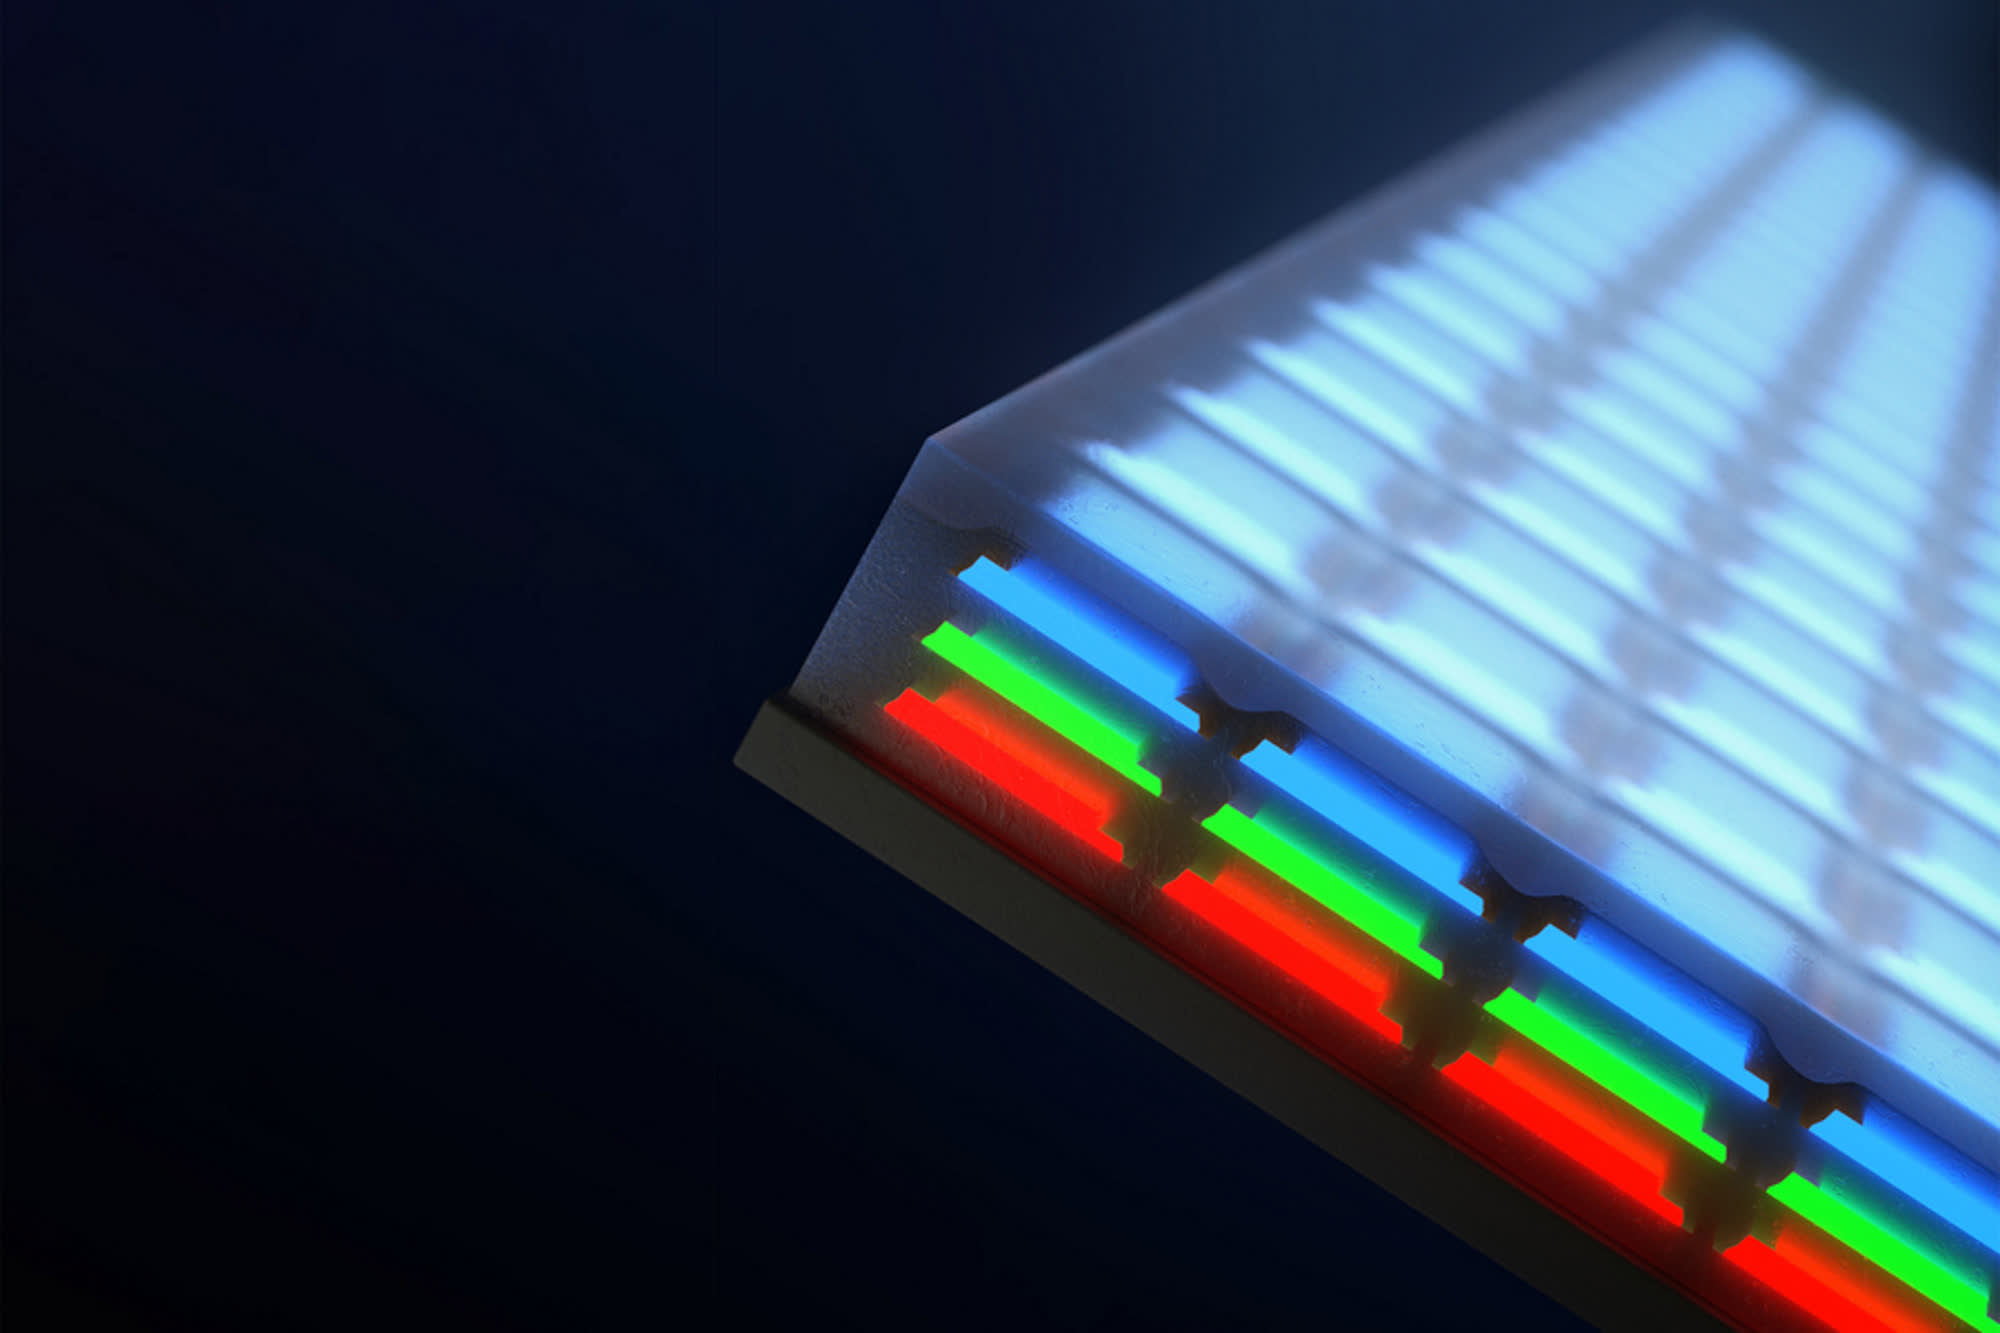 MIT engineers are making vertical micro-LEDs for next-generation displays and VR goggles